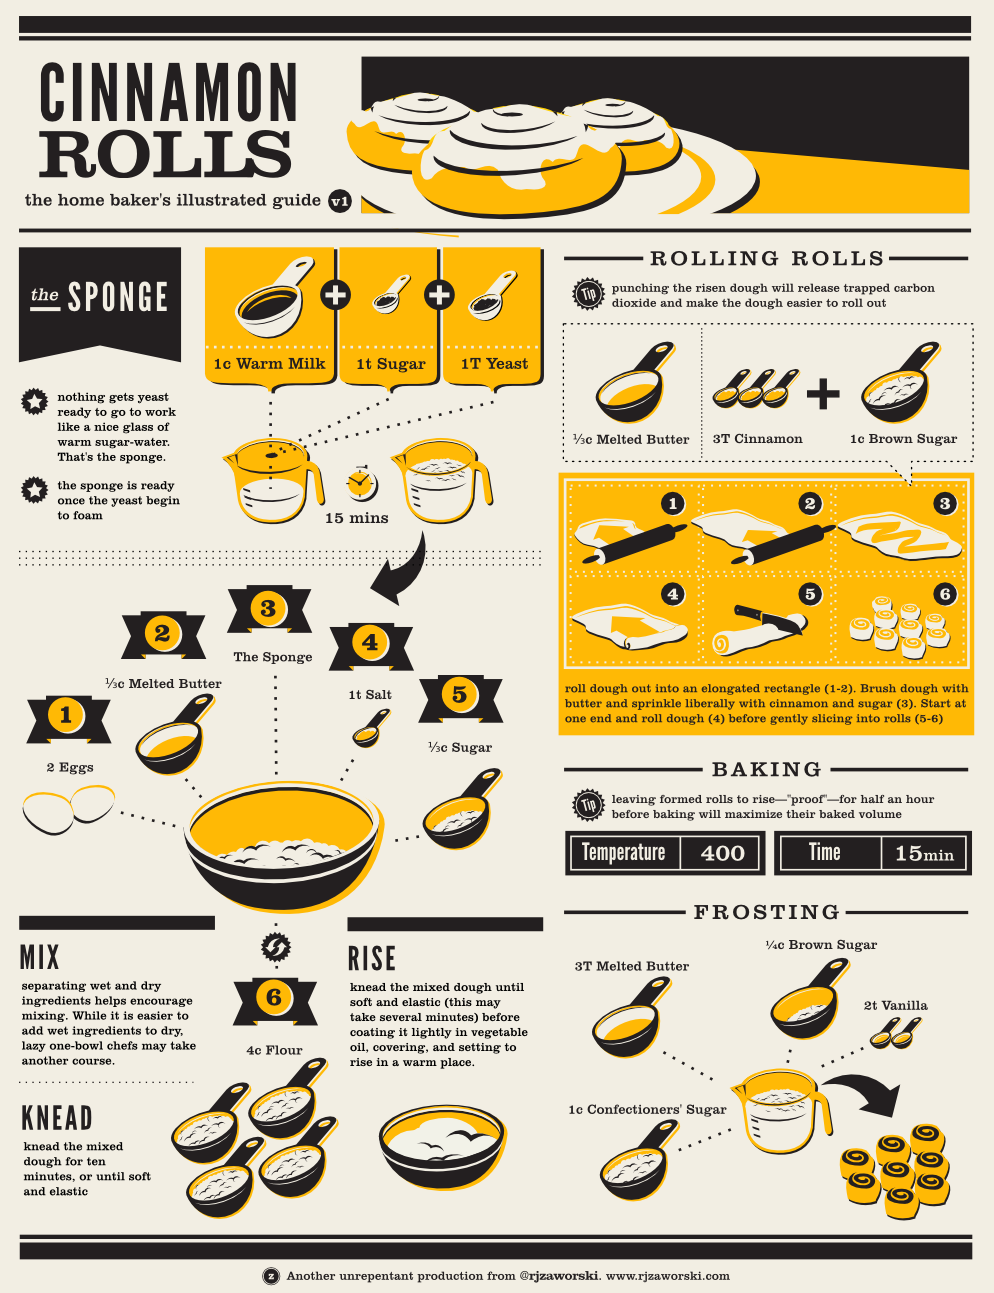 Infographic: an illustrated guide to cinnamon rolls